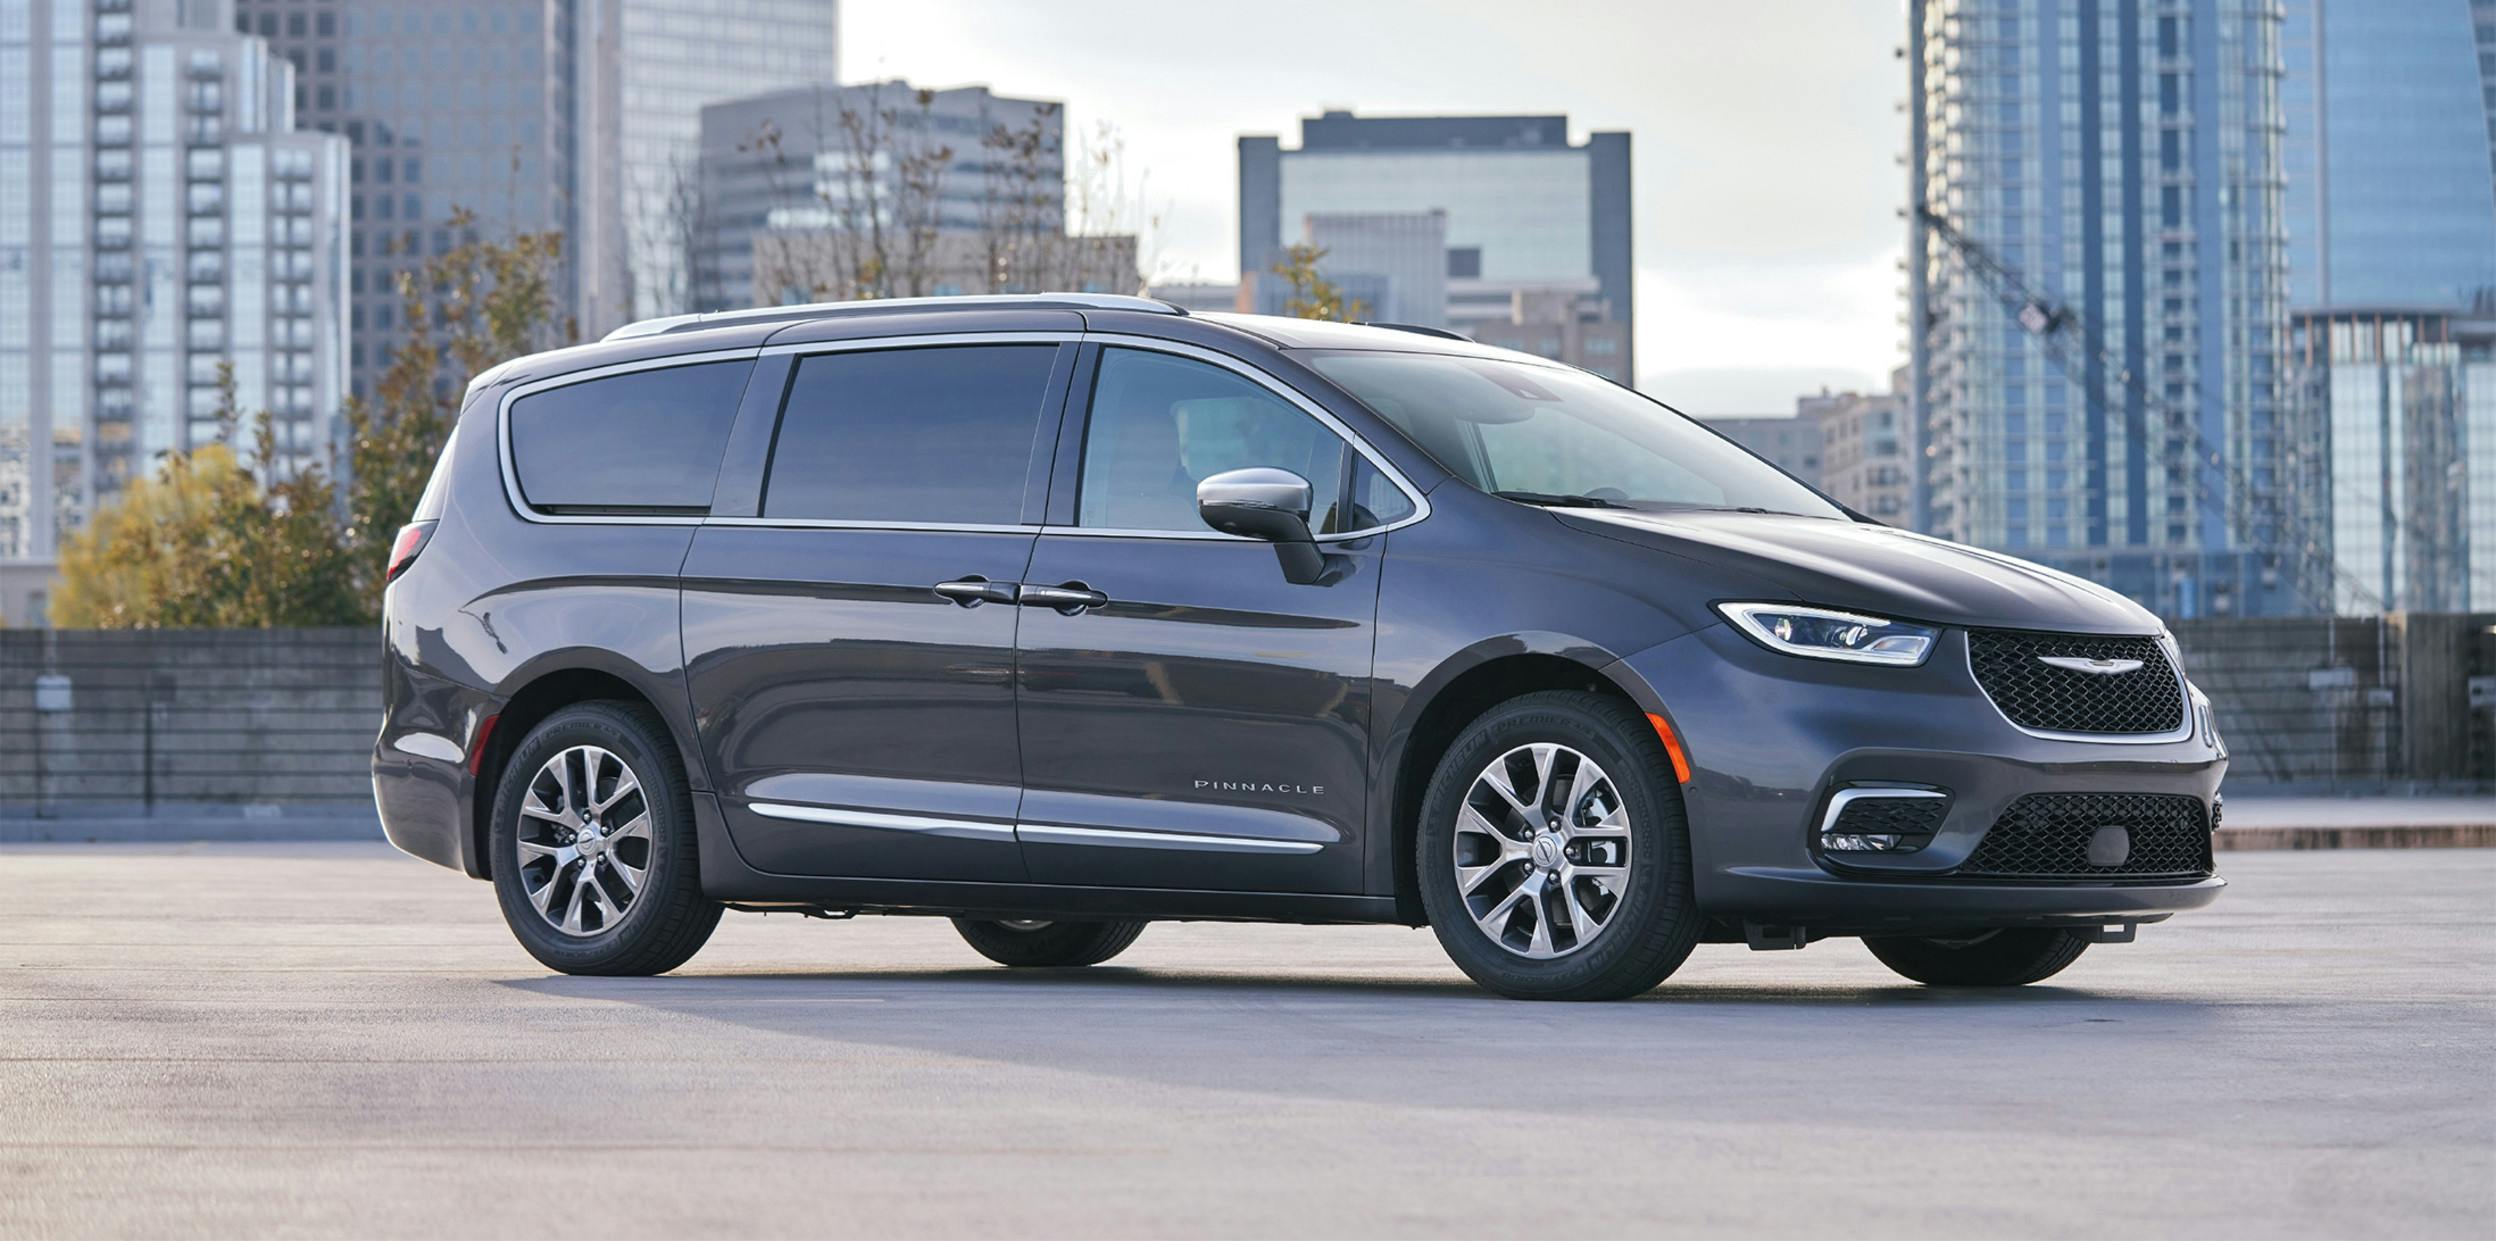 Chrysler Pacifica Hybrid Minivans Recalled for Fire Risk: What Consumers Need to Know